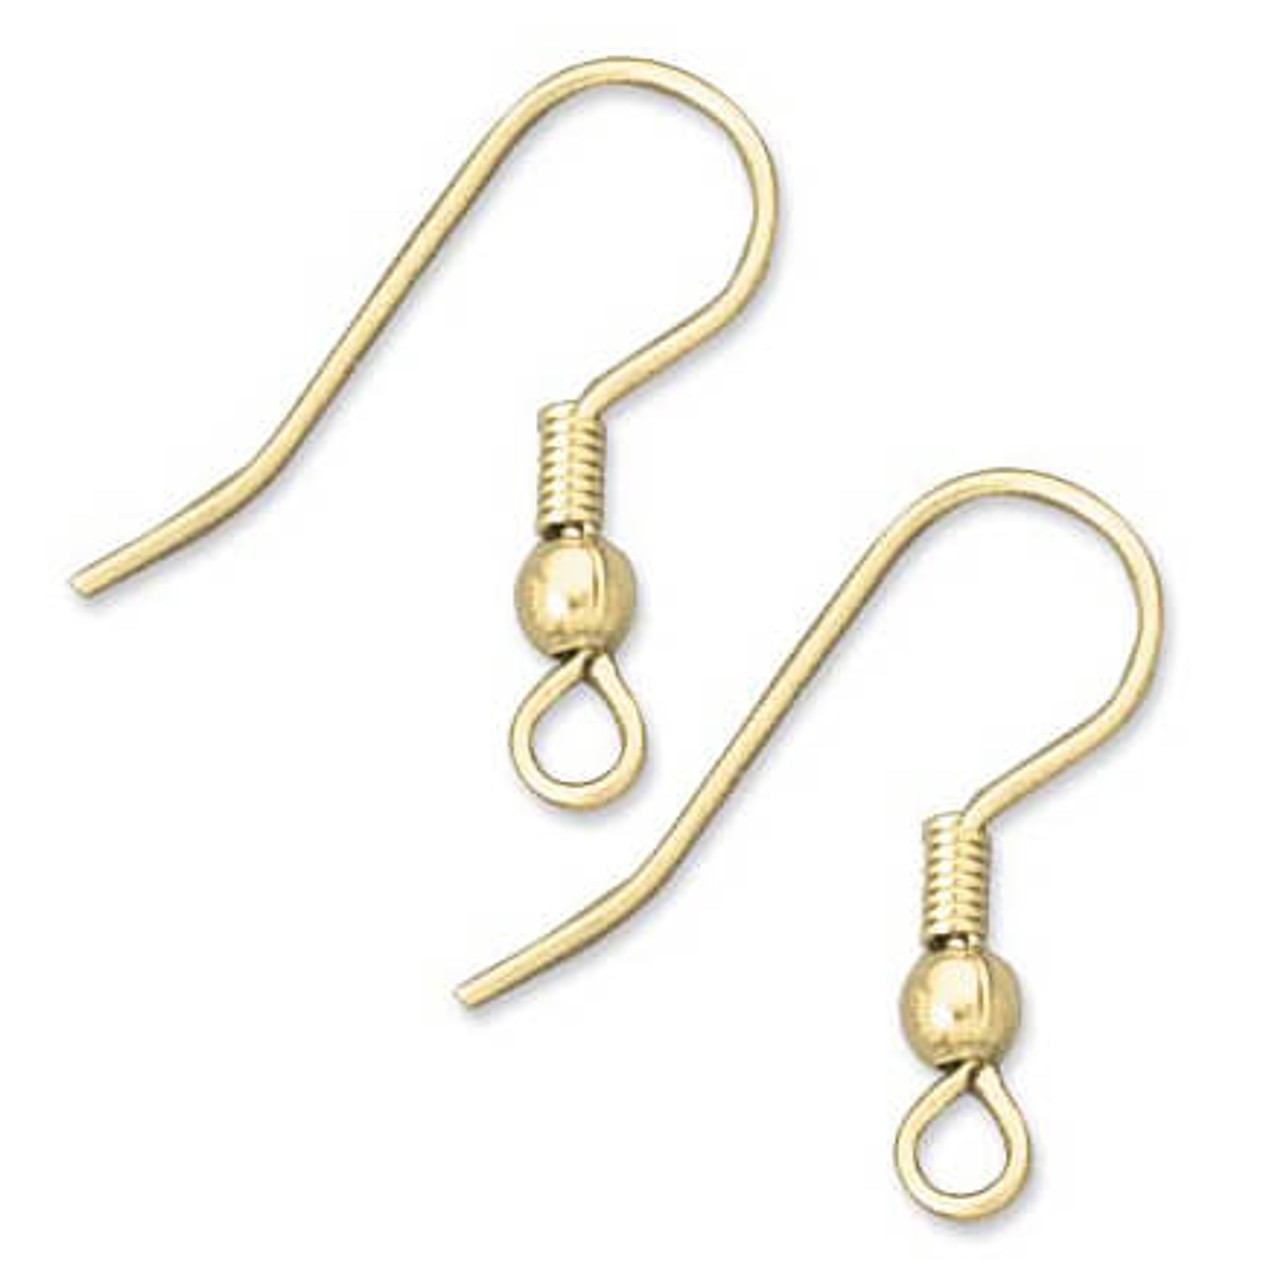 14K Gold Filled Earring Findings - Flat Fish Hook with Coil Ear